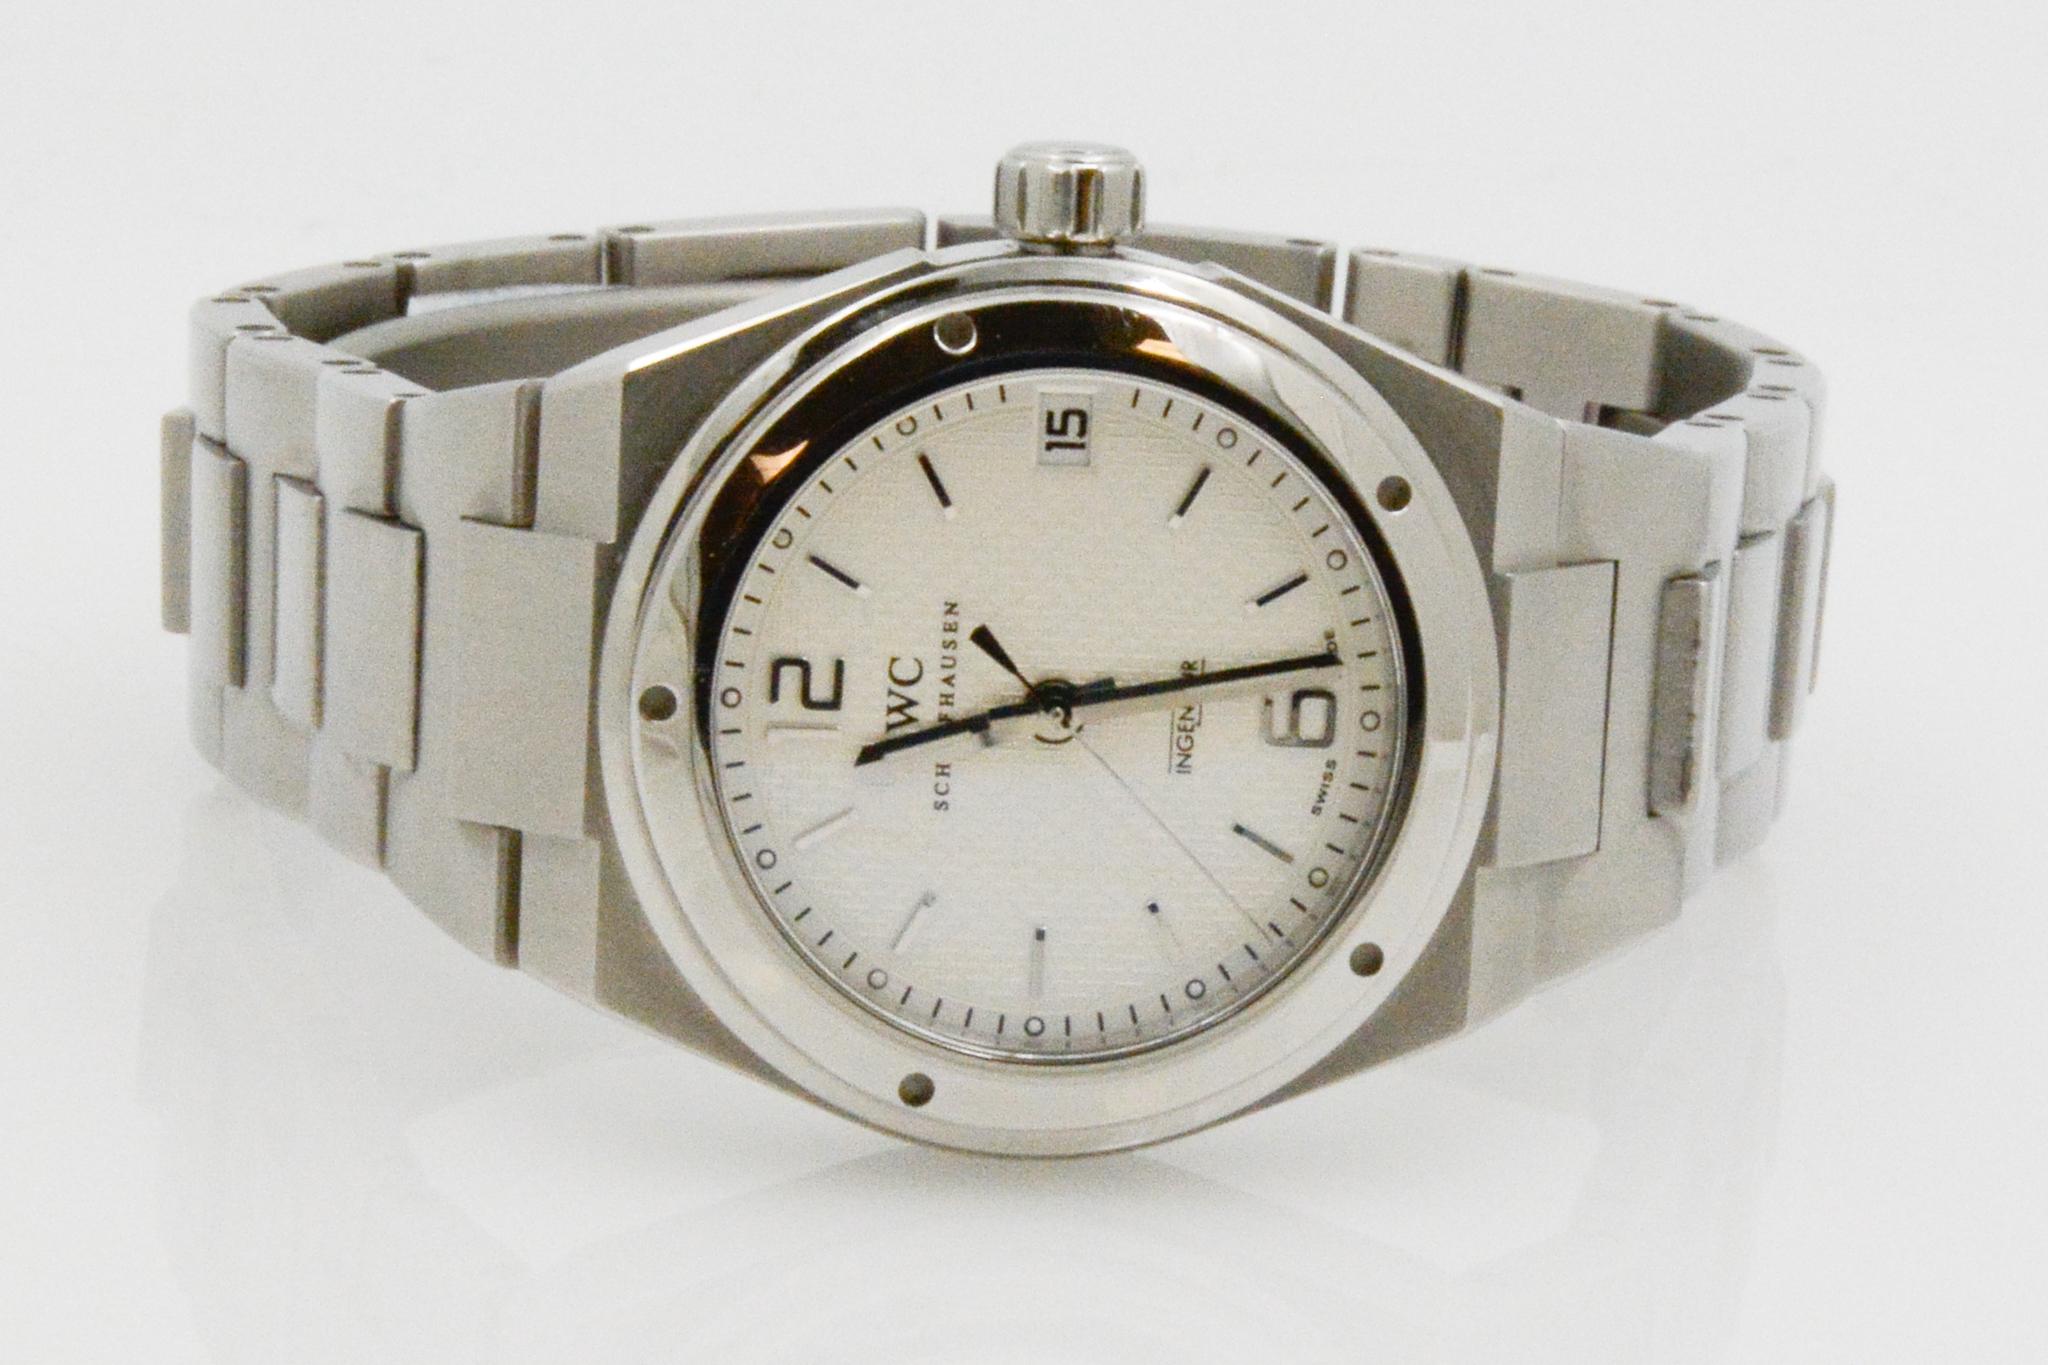 • Model: Ingenieur
• Movement: Automatic
• Case Size: 34mm 
• Case Material: Stainless steel
• Dial: White
• Strap: Stainless steel
• Closure/Clasp Type: Pushbutton deployment clasp
• CIRCA 2009; comes with papers only
• Excellent Condition 

The